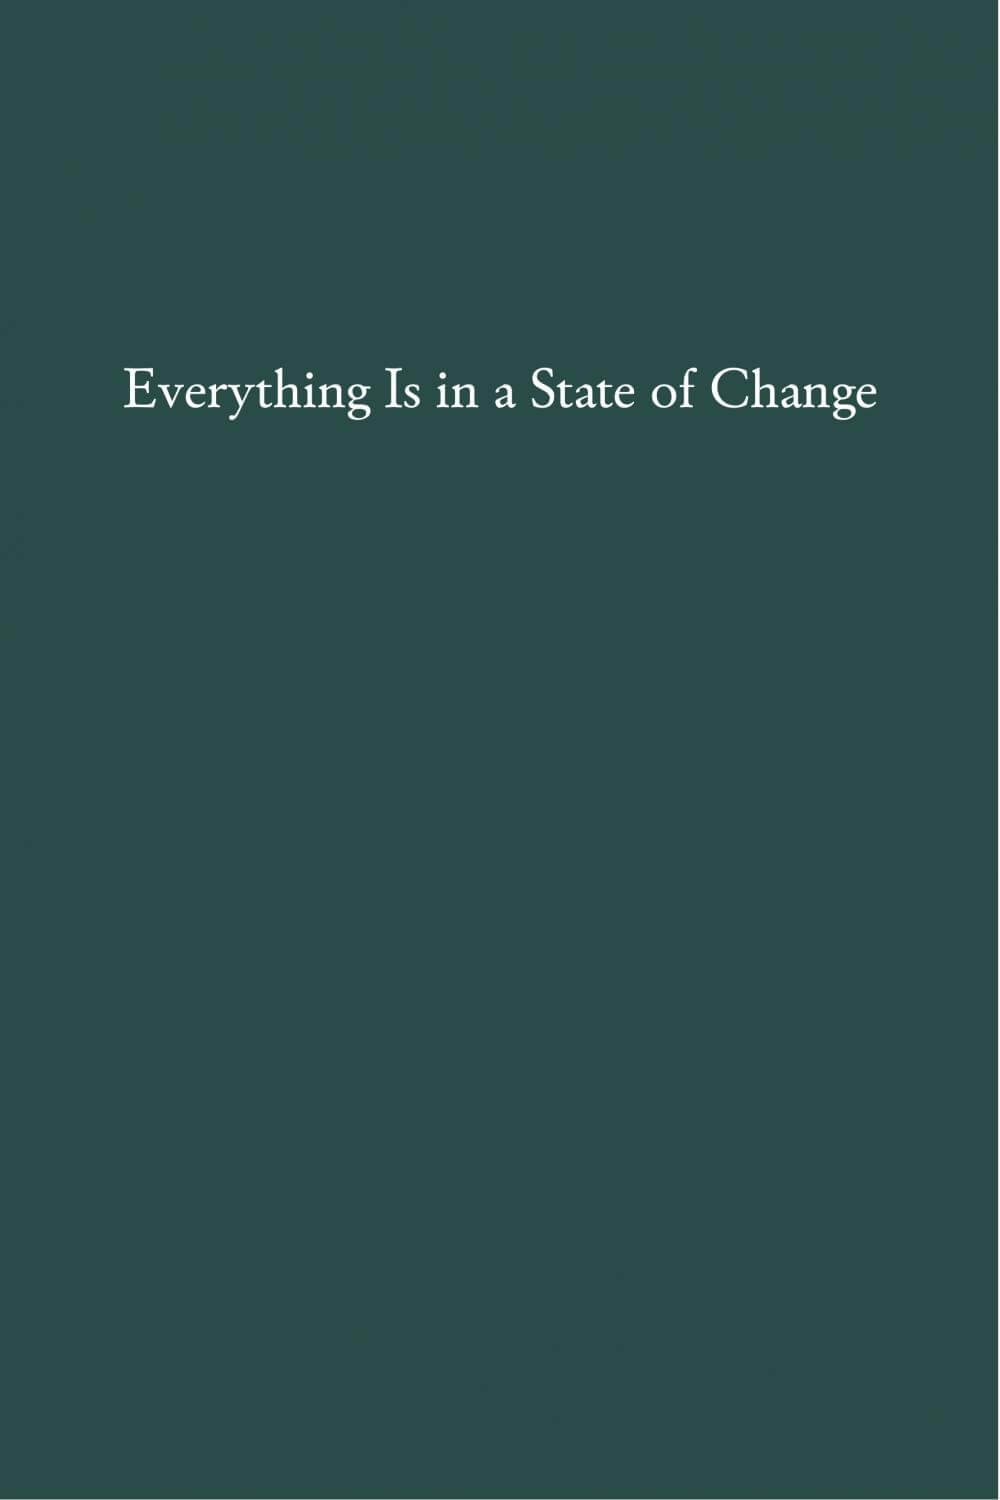 Everything is in a State of Change